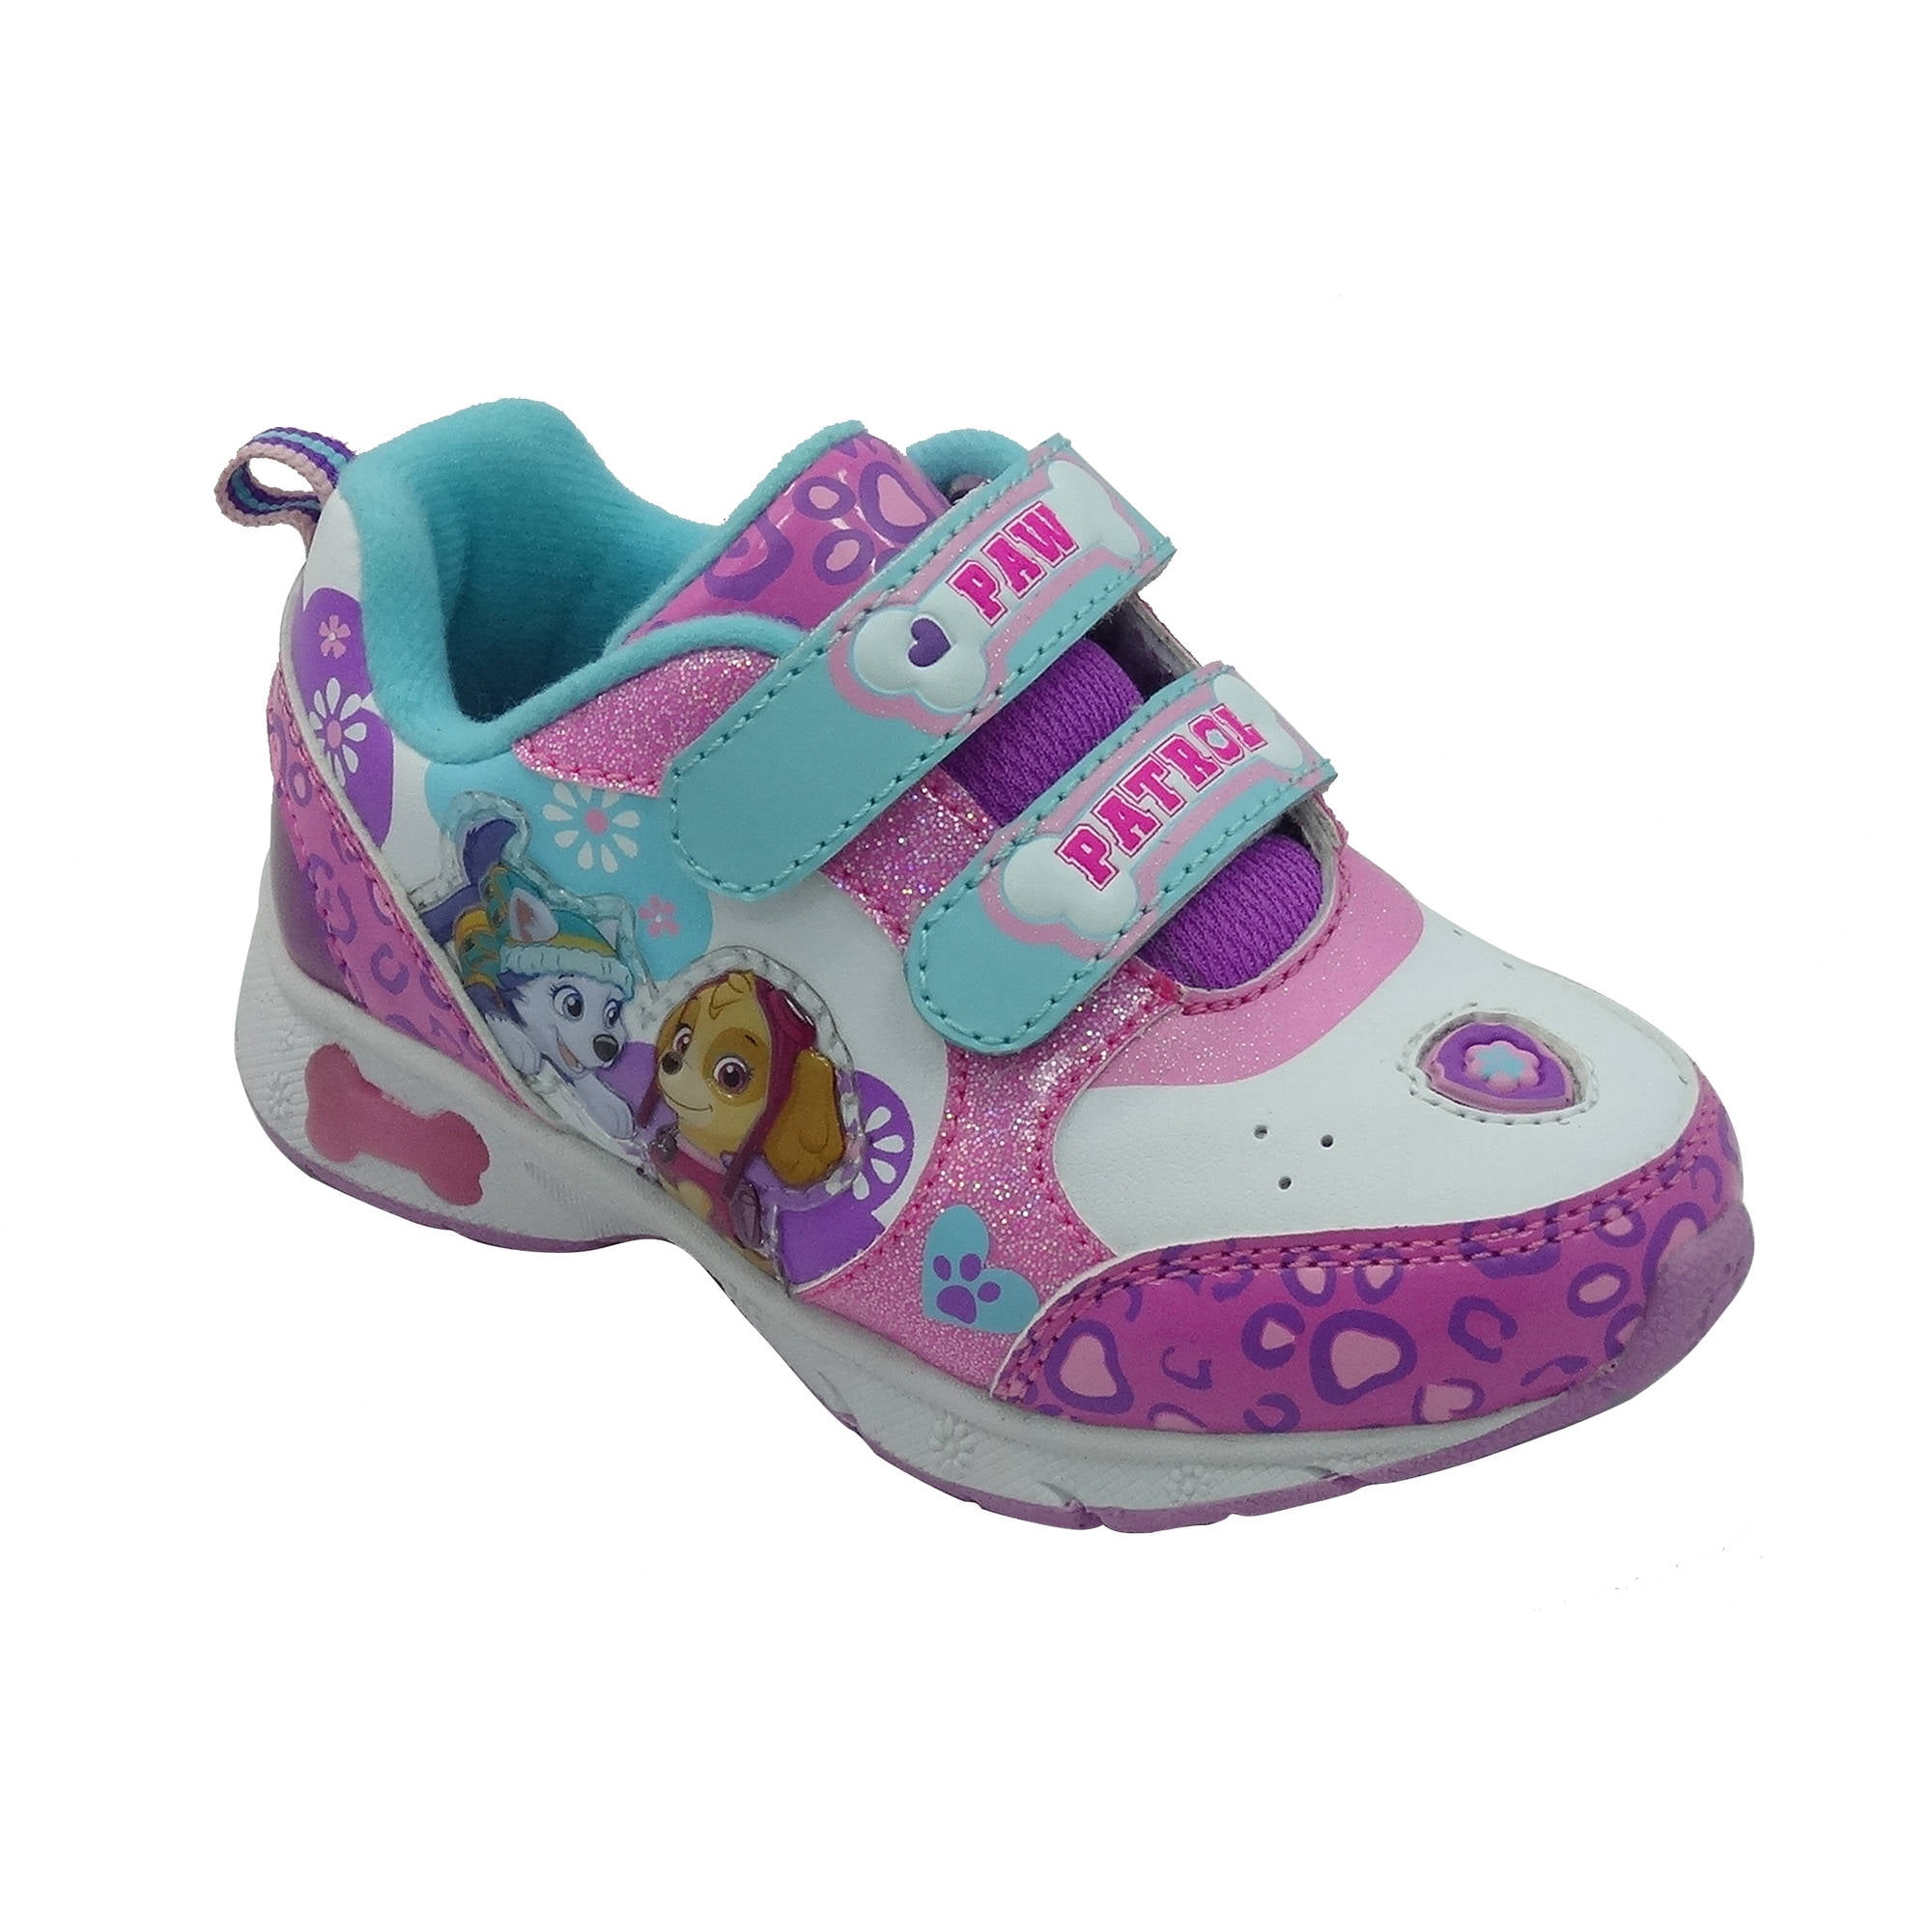 barbie shoes for toddlers